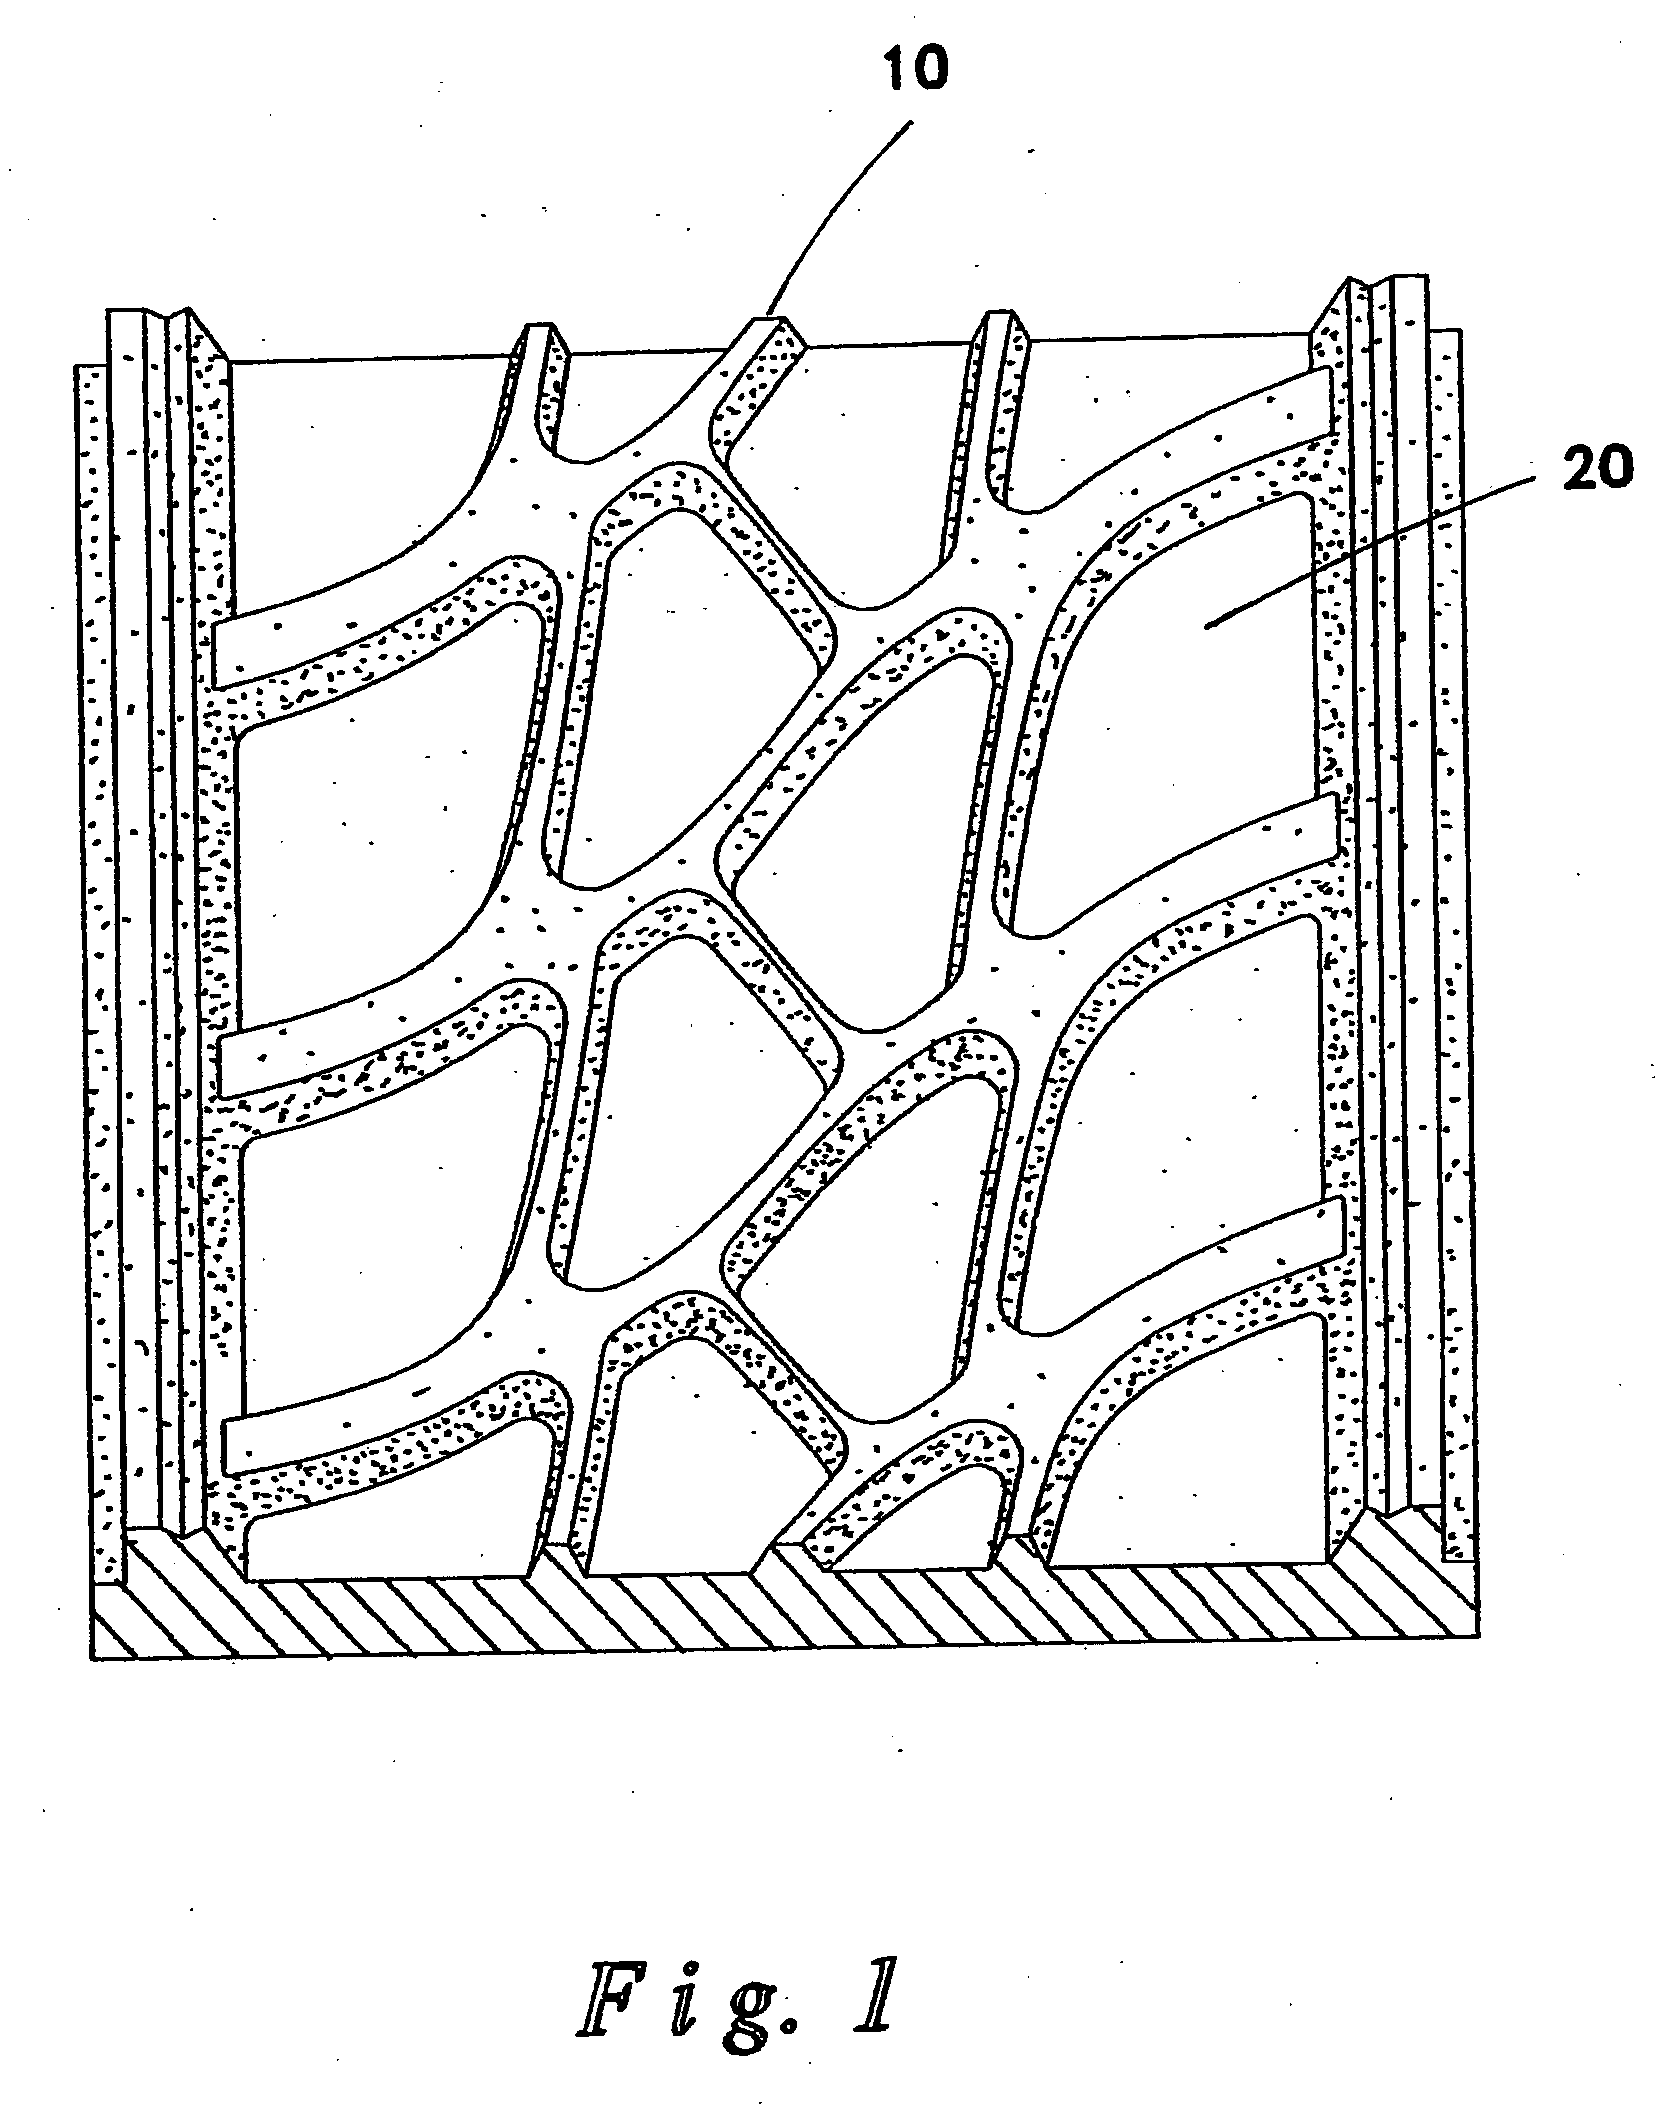 Method for curing a thick, non-uniform rubber article